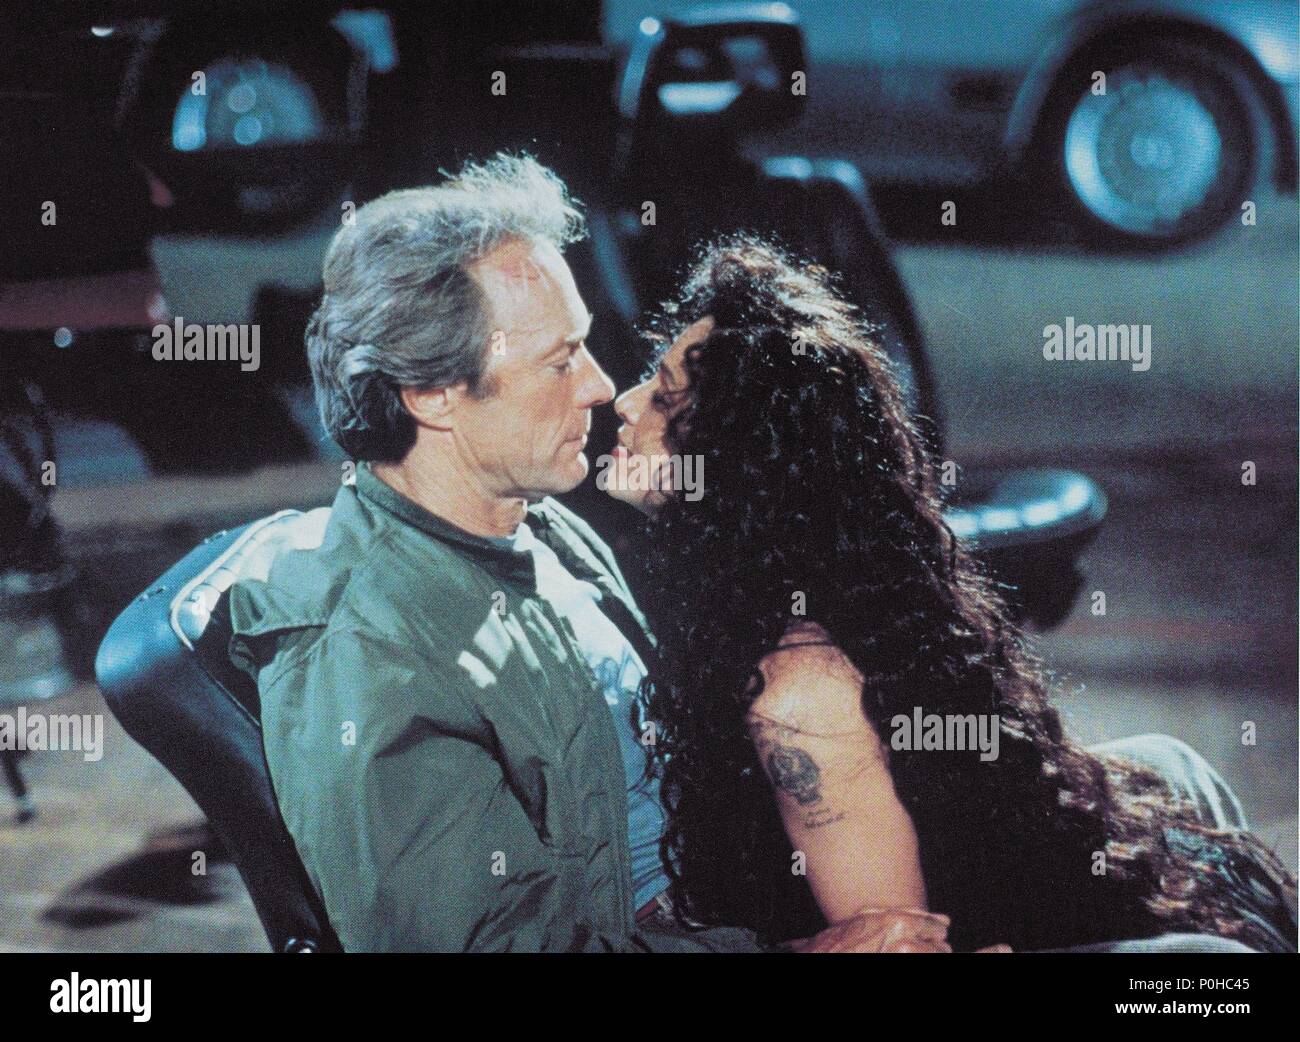 Original Film Title: THE ROOKIE. English Title: THE ROOKIE. Film Director:  CLINT EASTWOOD. Year: 1990. Stars: CLINT EASTWOOD; SONIA BRAGA. Credit:  WARNER BROTHERS / Album Stock Photo - Alamy